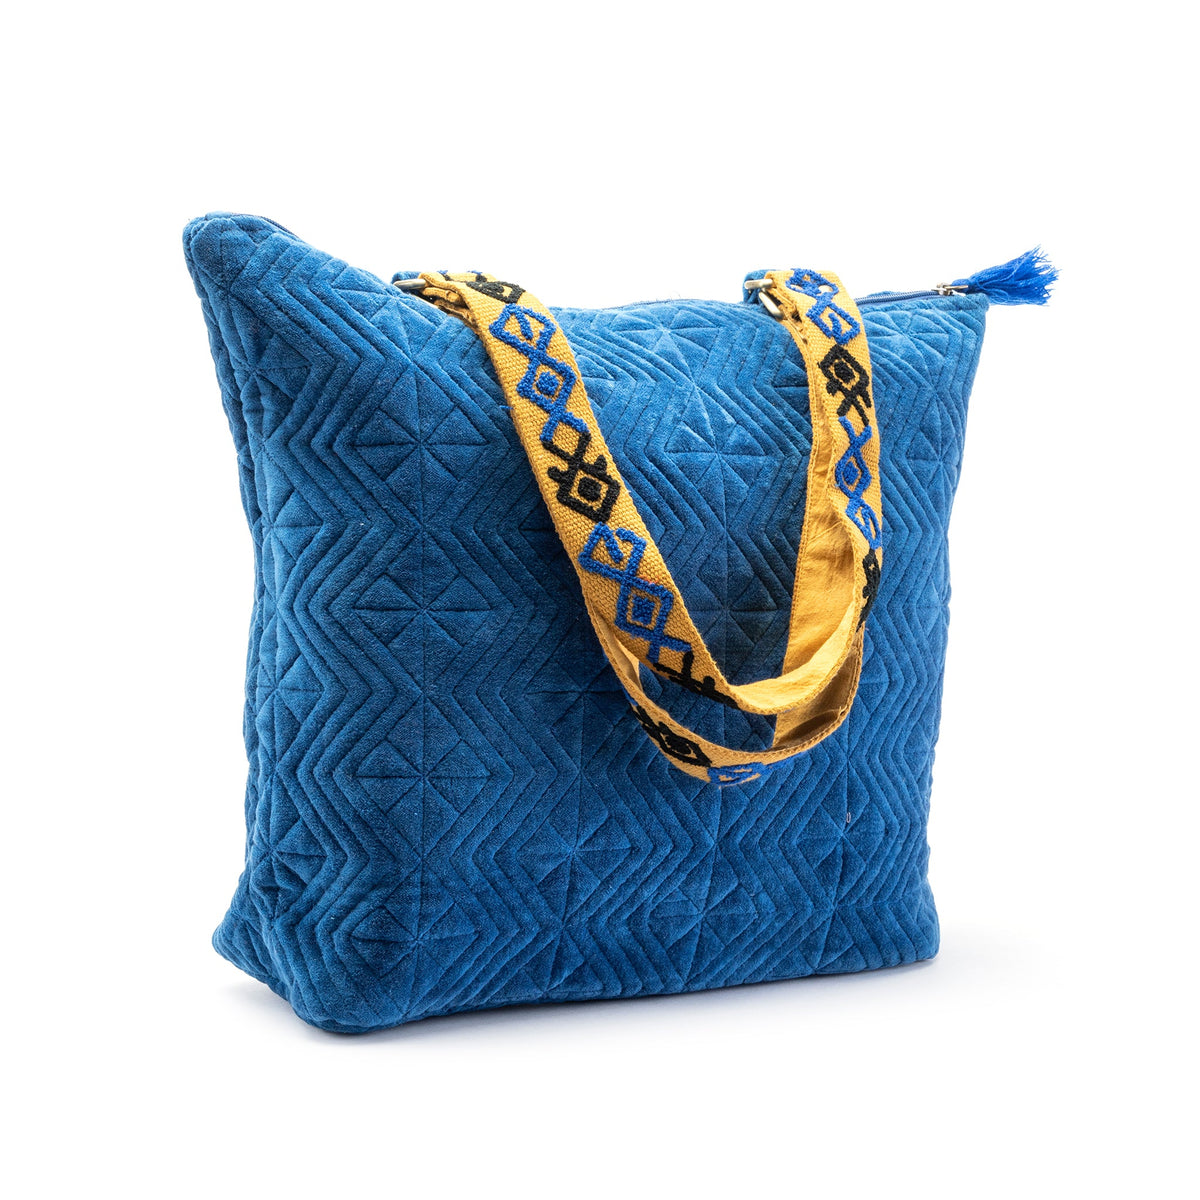 Quilted Tote Bag with Hand Embroidered Strap-Royal Diamond